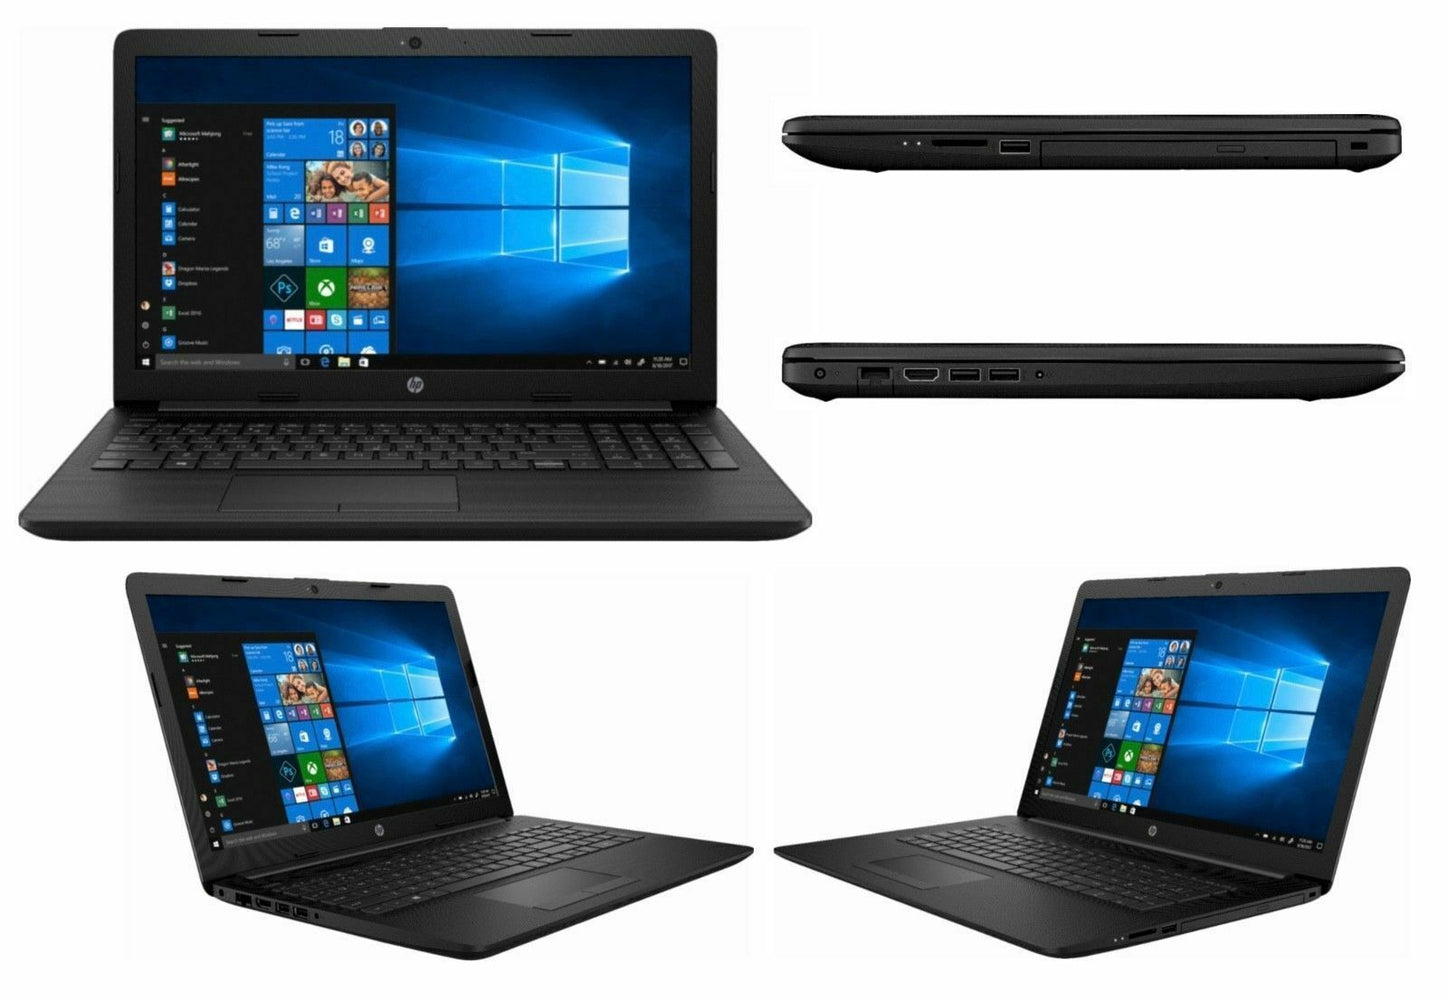 HP - 15.6" Laptop - AMD A6-Series - 4GB Memory - AMD Radeon R4 - 1TB Hard Drive - HP Finish In Jet Black With A Maglia Texture